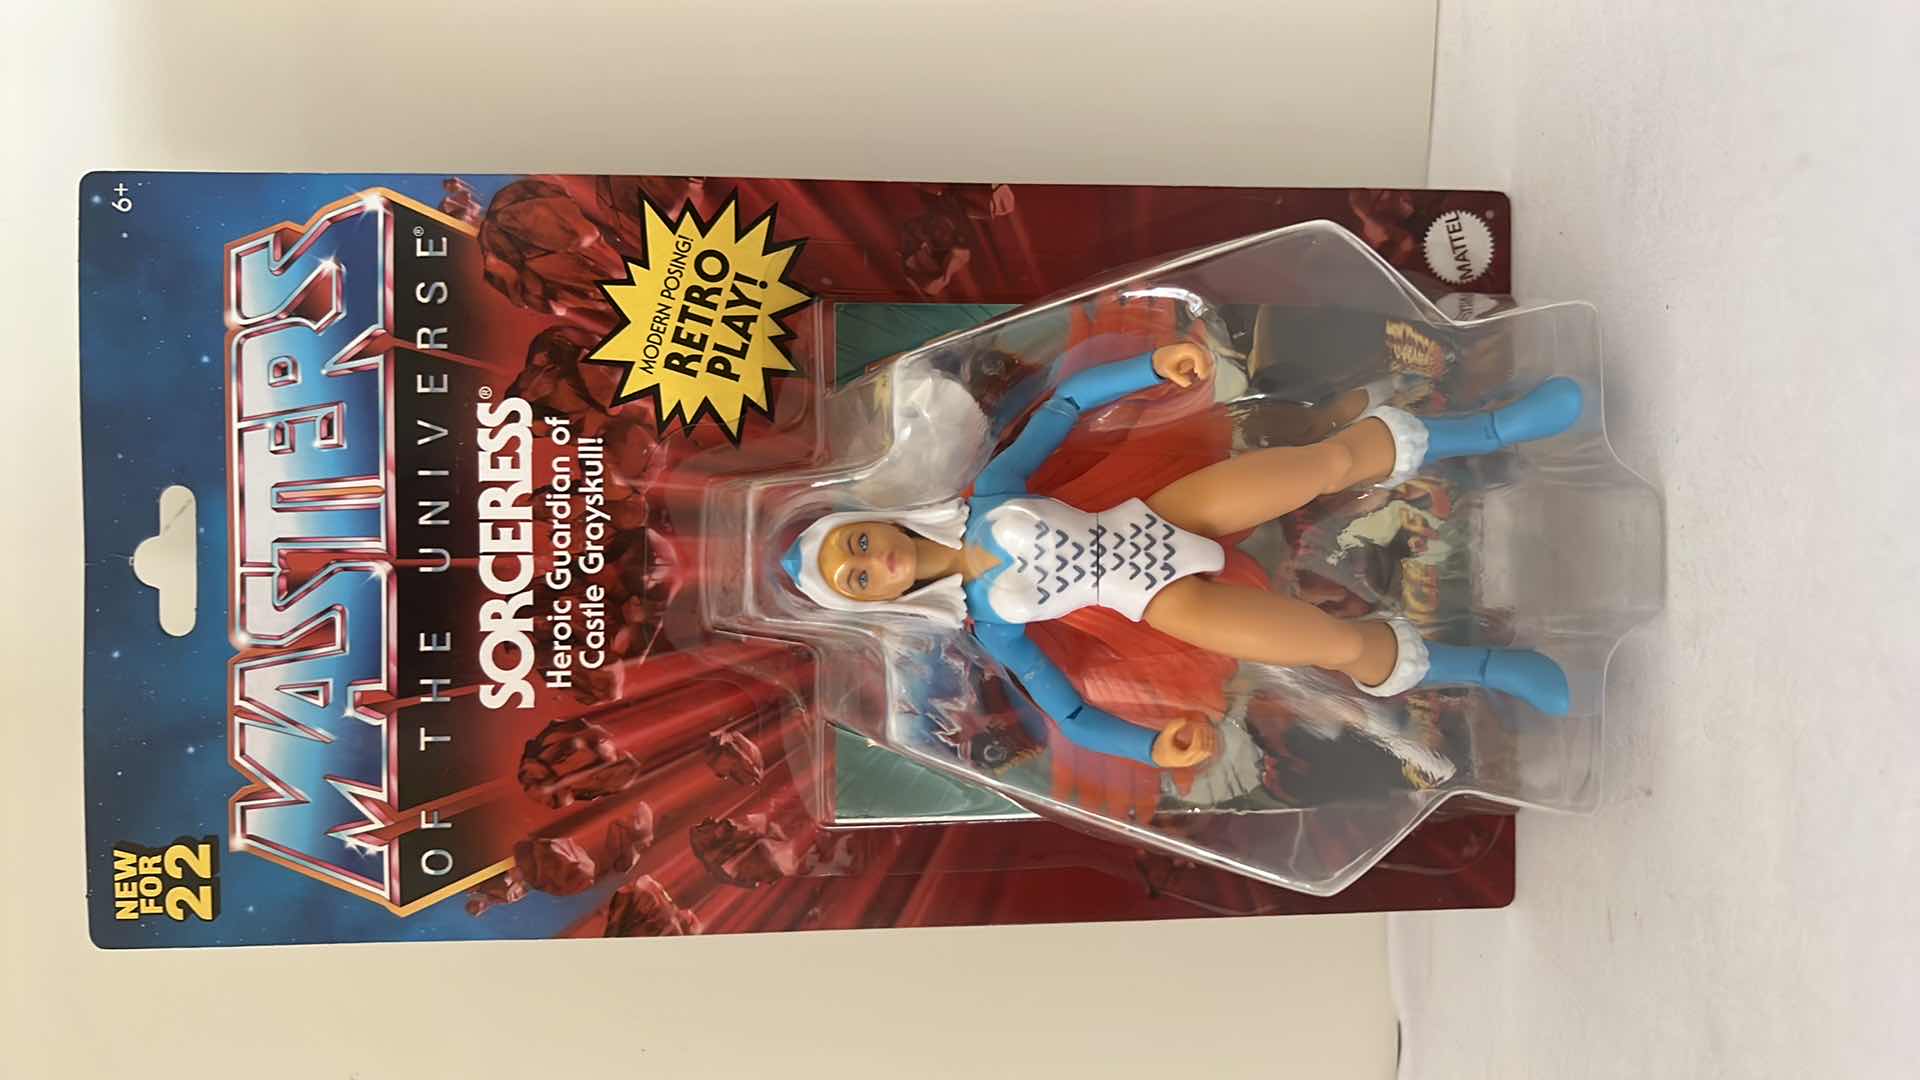 Photo 1 of BRAND NEW MATTEL MASTERS OF THE UNIVERSE “SORCERESS” ACTION FIGURE. $22